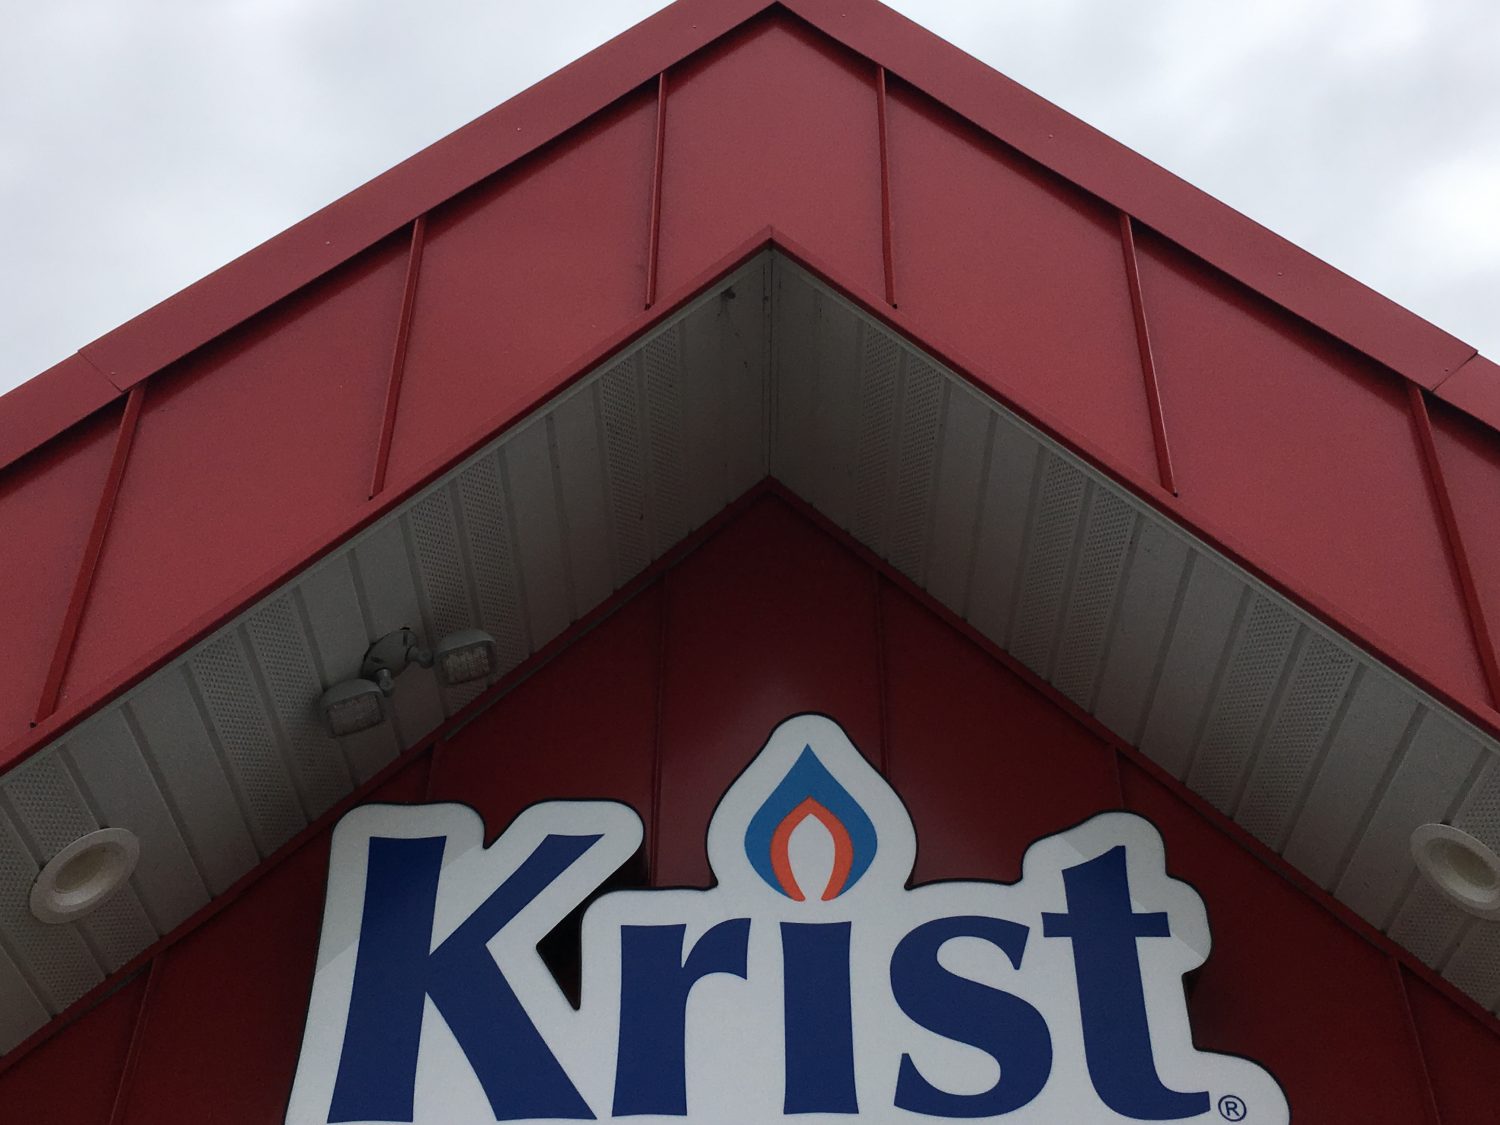 Krist Oil Raises $17,759 to Help Families Living with Muscular Dystrophy